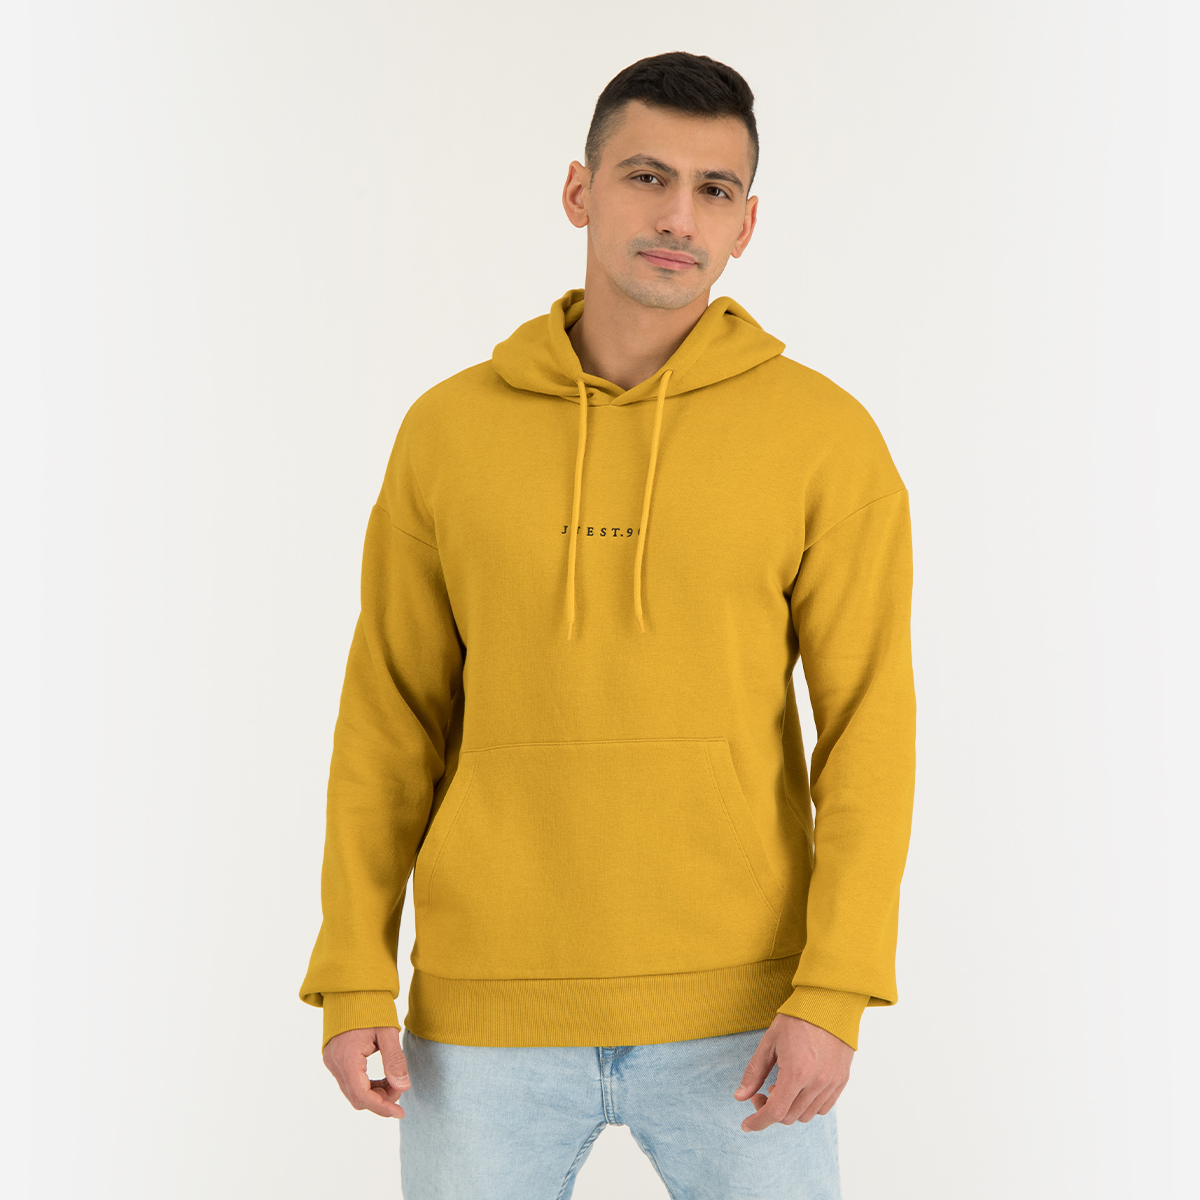 Buy New State Hoodie - Gold Online in Kuwait | Boutiqaat